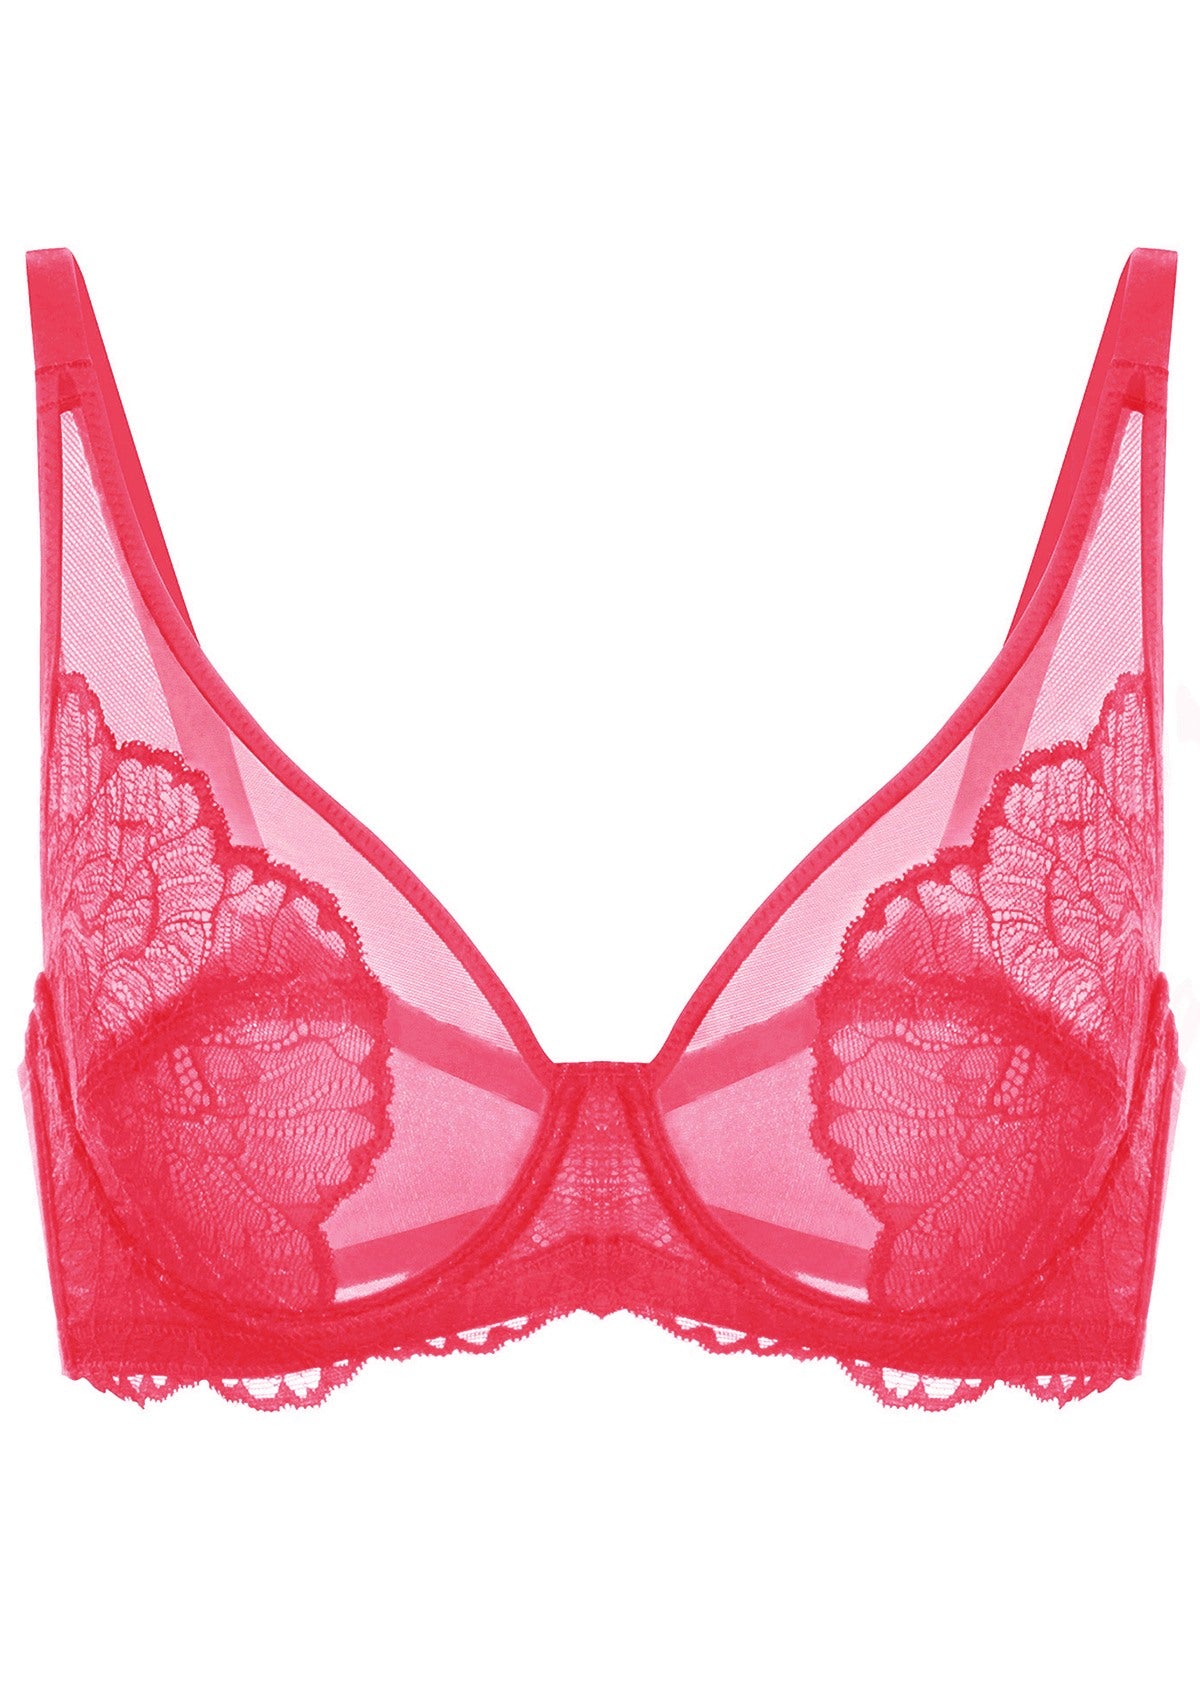 HSIA Blossom Unlined Lace Underwire Bra - Raspberry / 36 / D